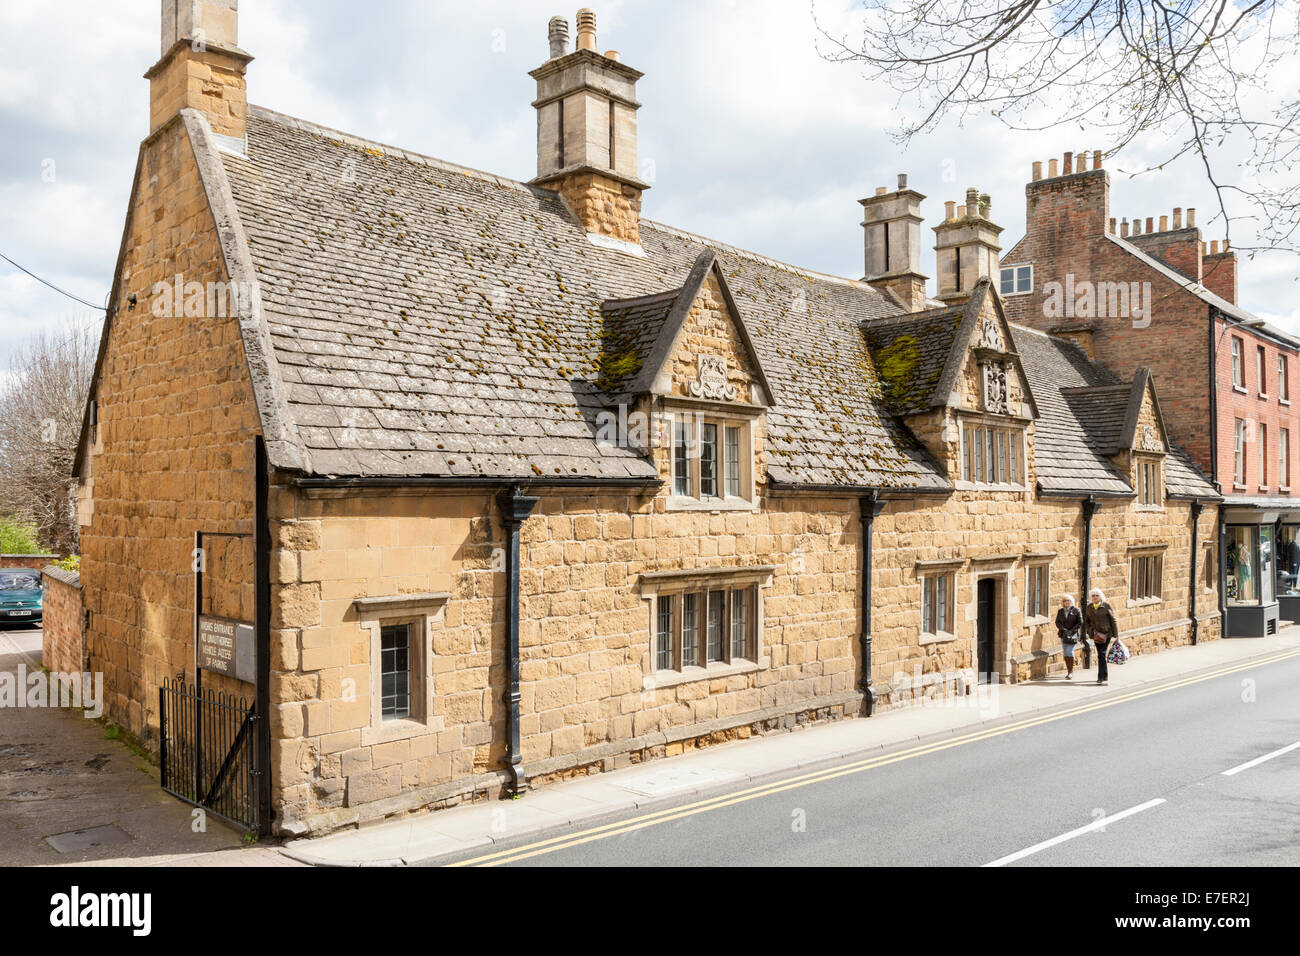 The Grade II listed Maison Dieu Bedehouses, a 17th century Almshouse, Melton Mowbray, Leicestershire, England, UK Stock Photo